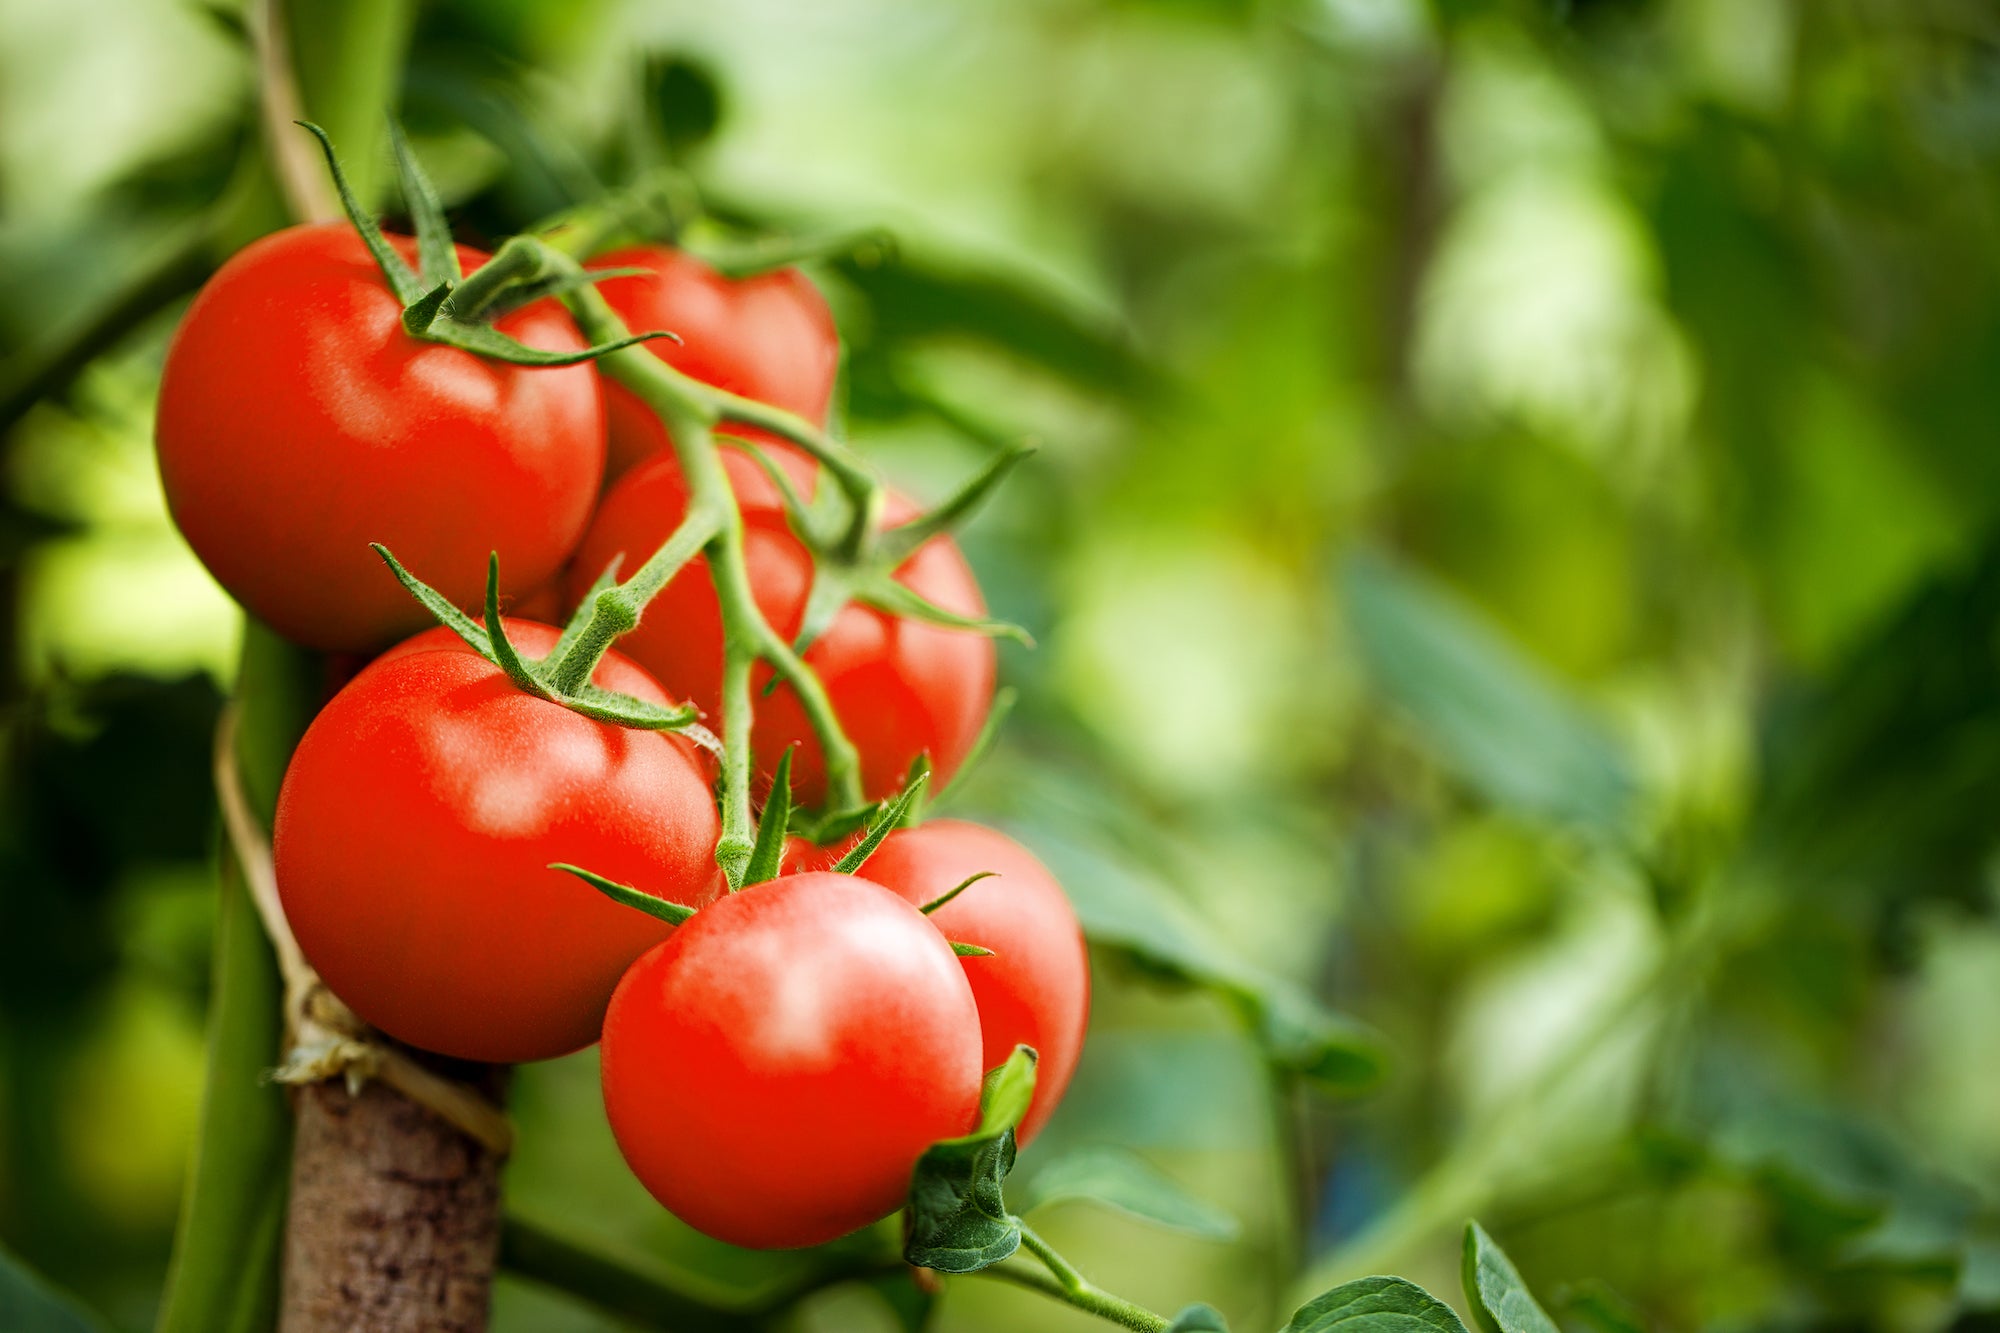 Growing Your Own Juicy Tomatoes